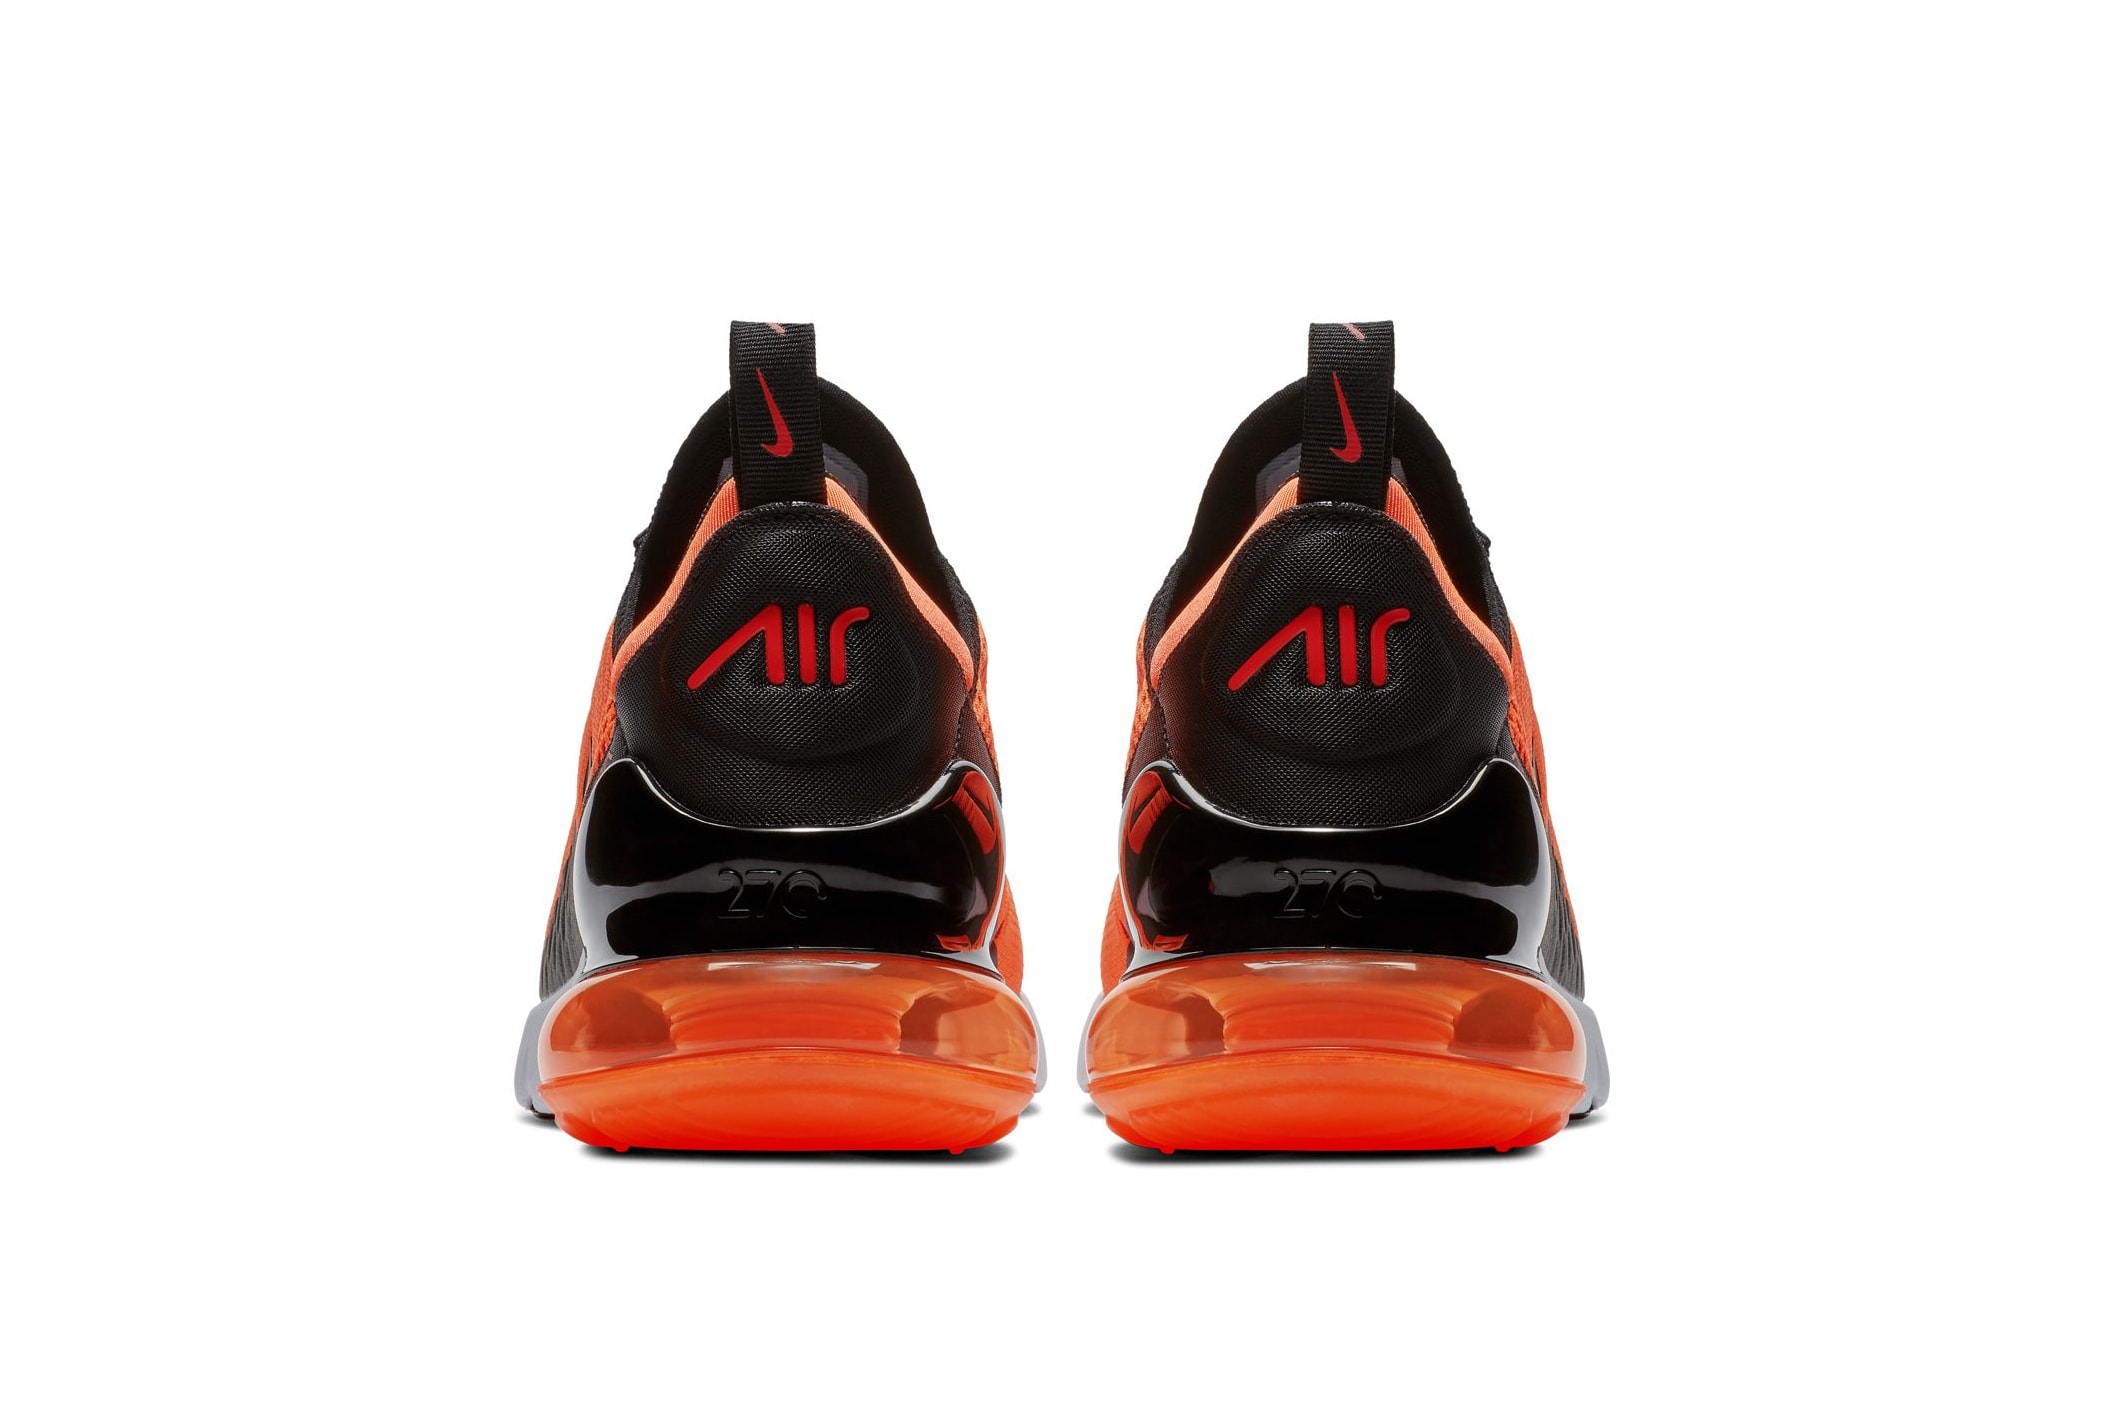 Nike Air Max 270 Total Orange first look release date sneaker colorway TOTAL ORANGE BLACK WHITE CHILE RED